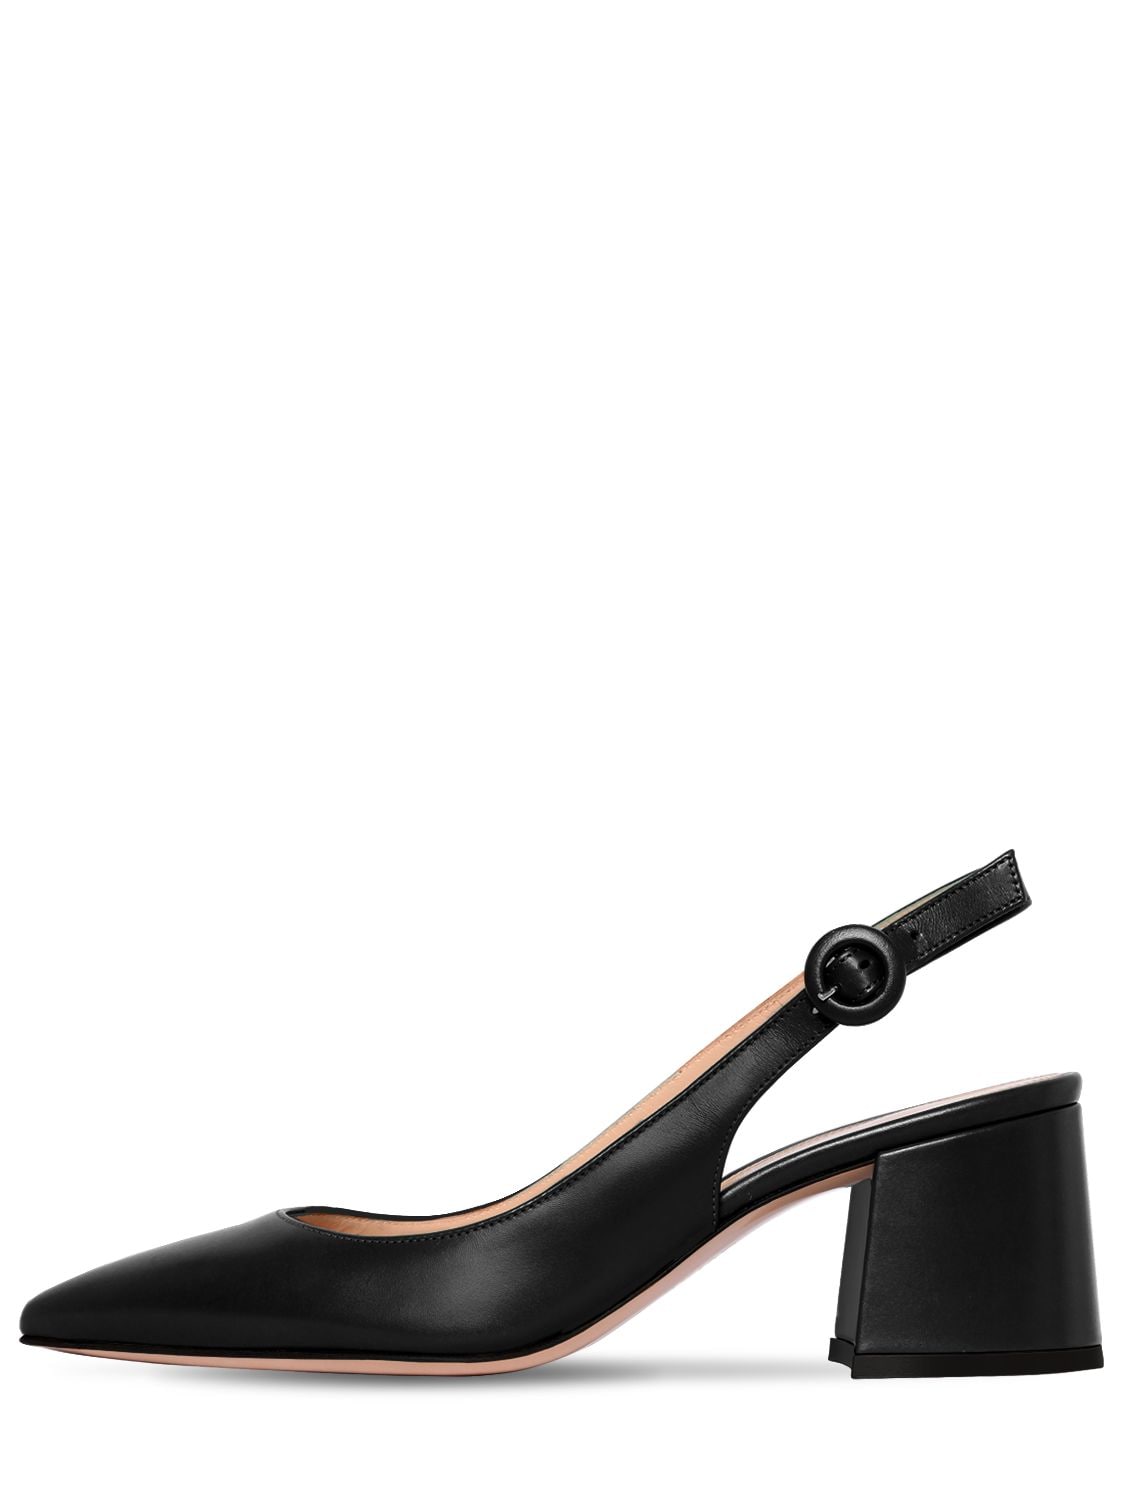 Gianvito Rossi 60mm Leather Sling Back Pumps In Black